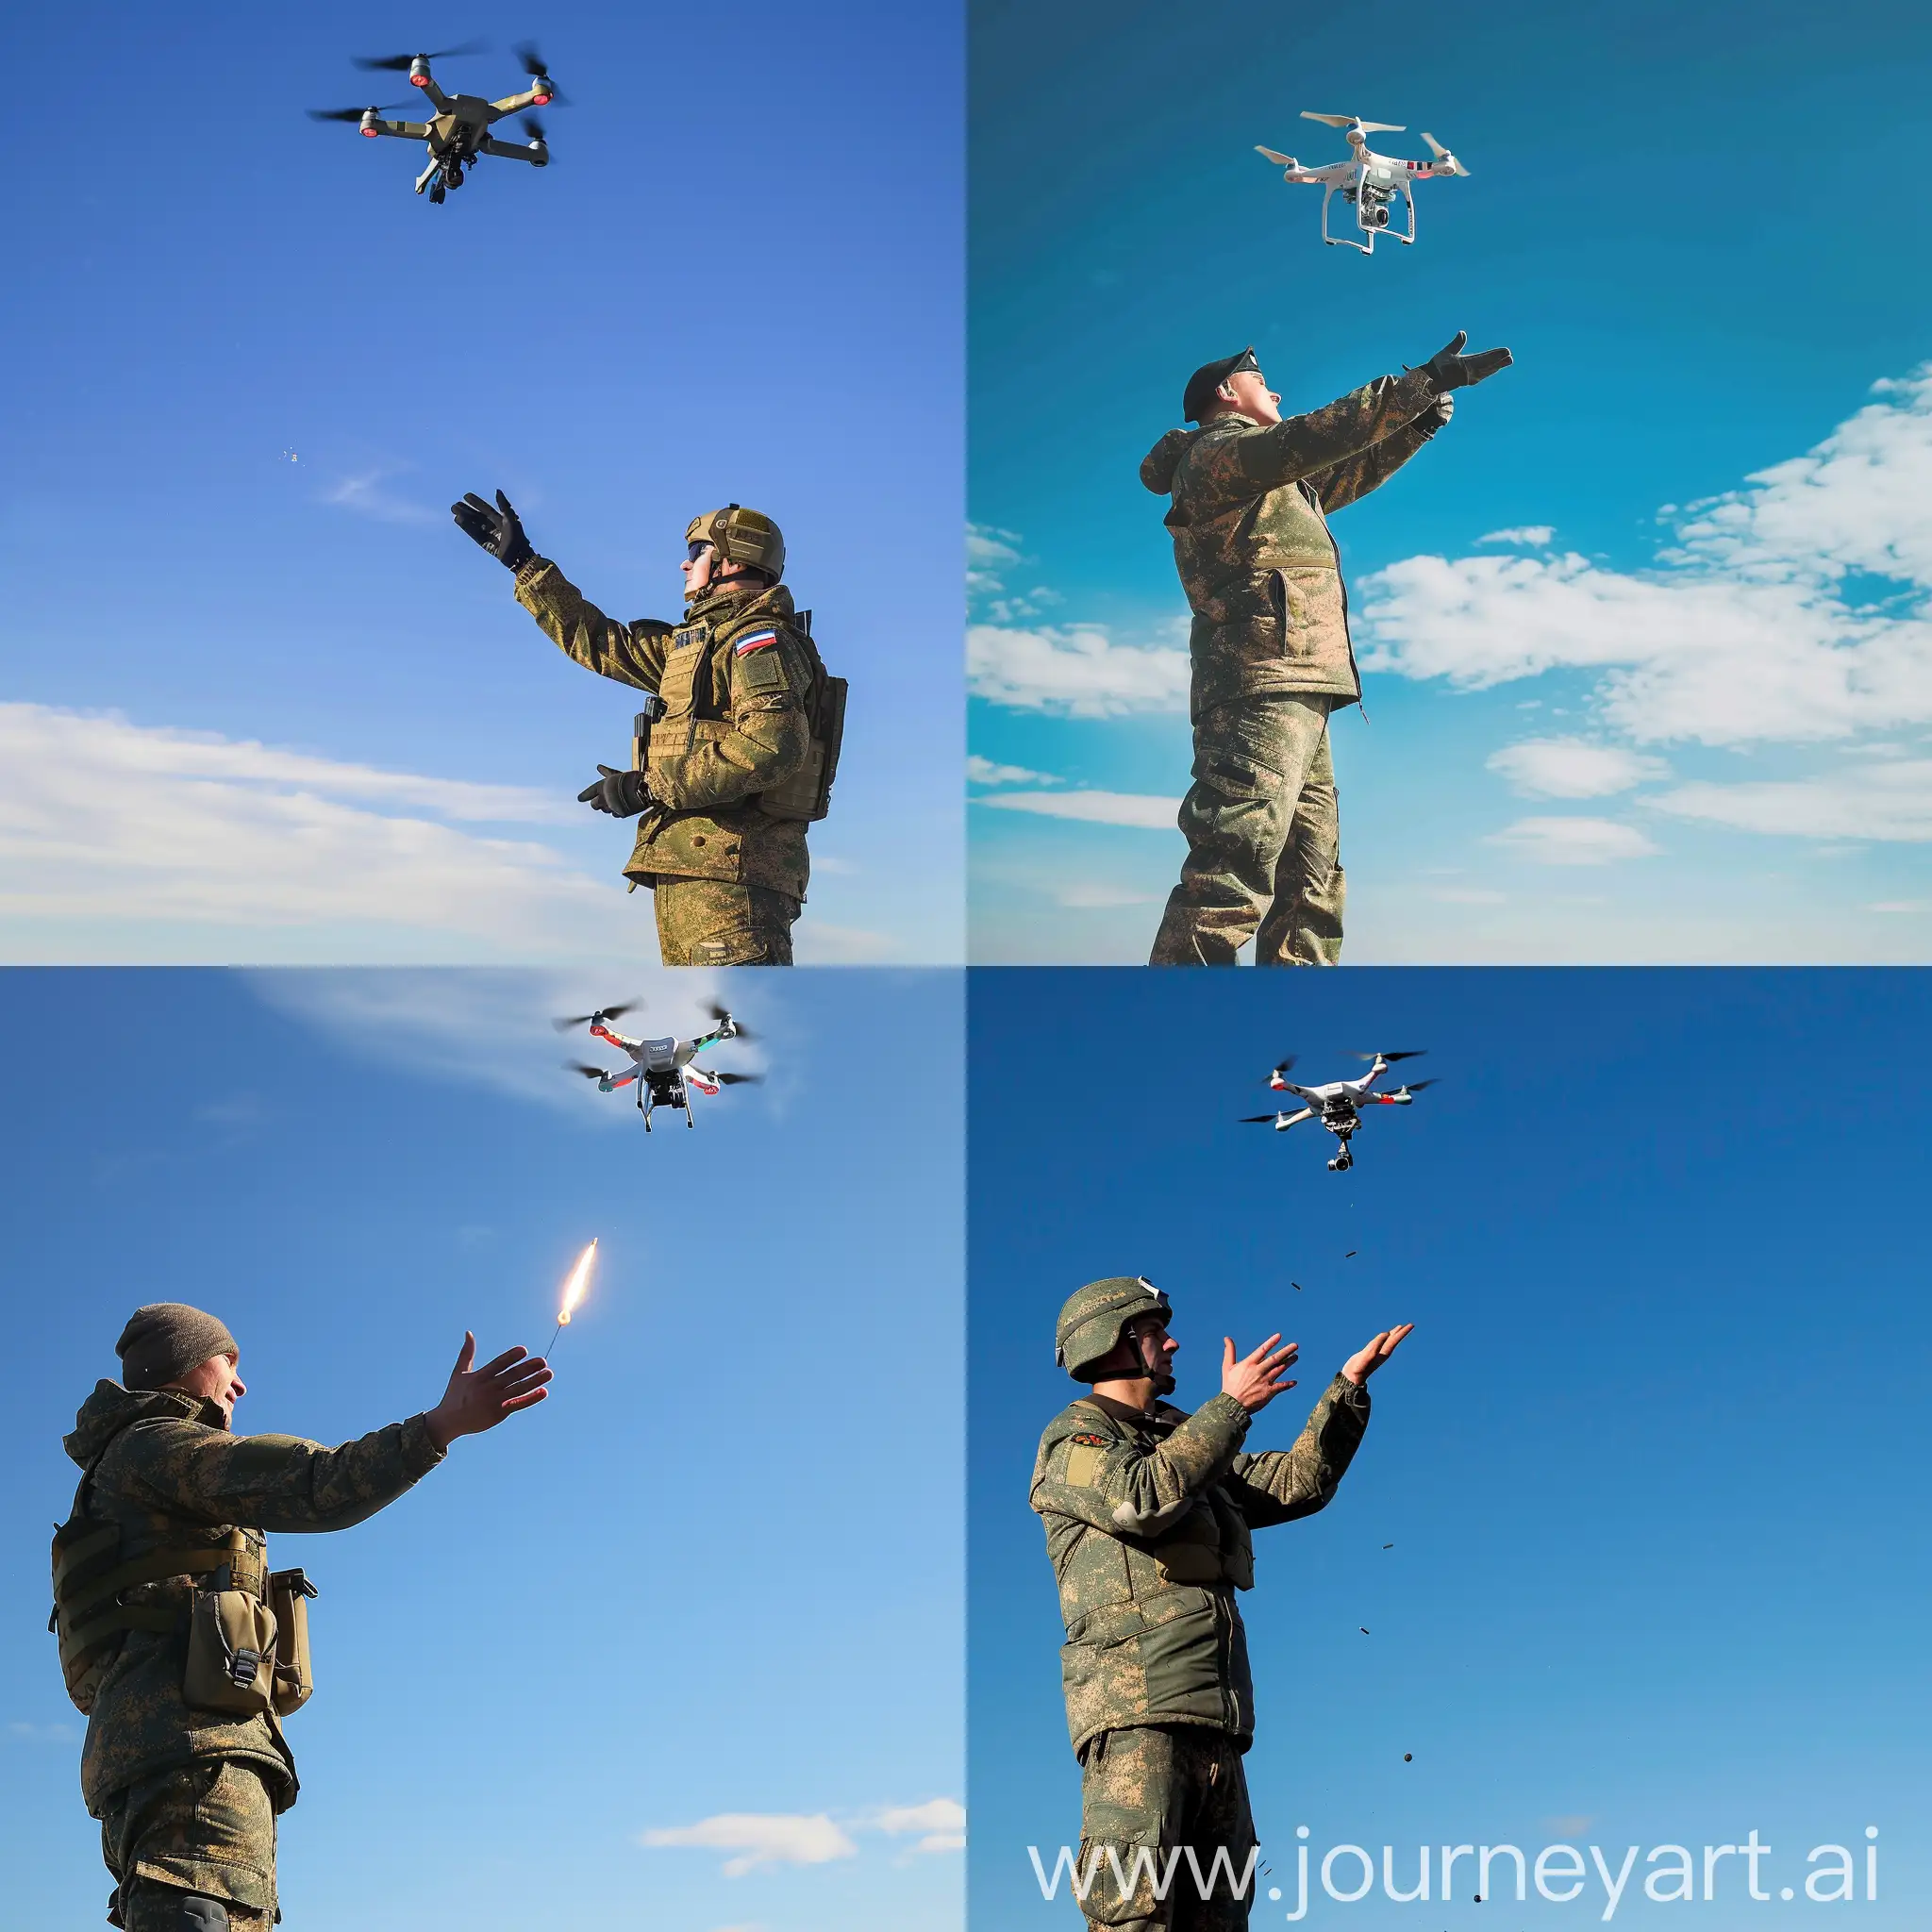 photo a Russian military man stands tall and launches a drone from his hand into the blue sky